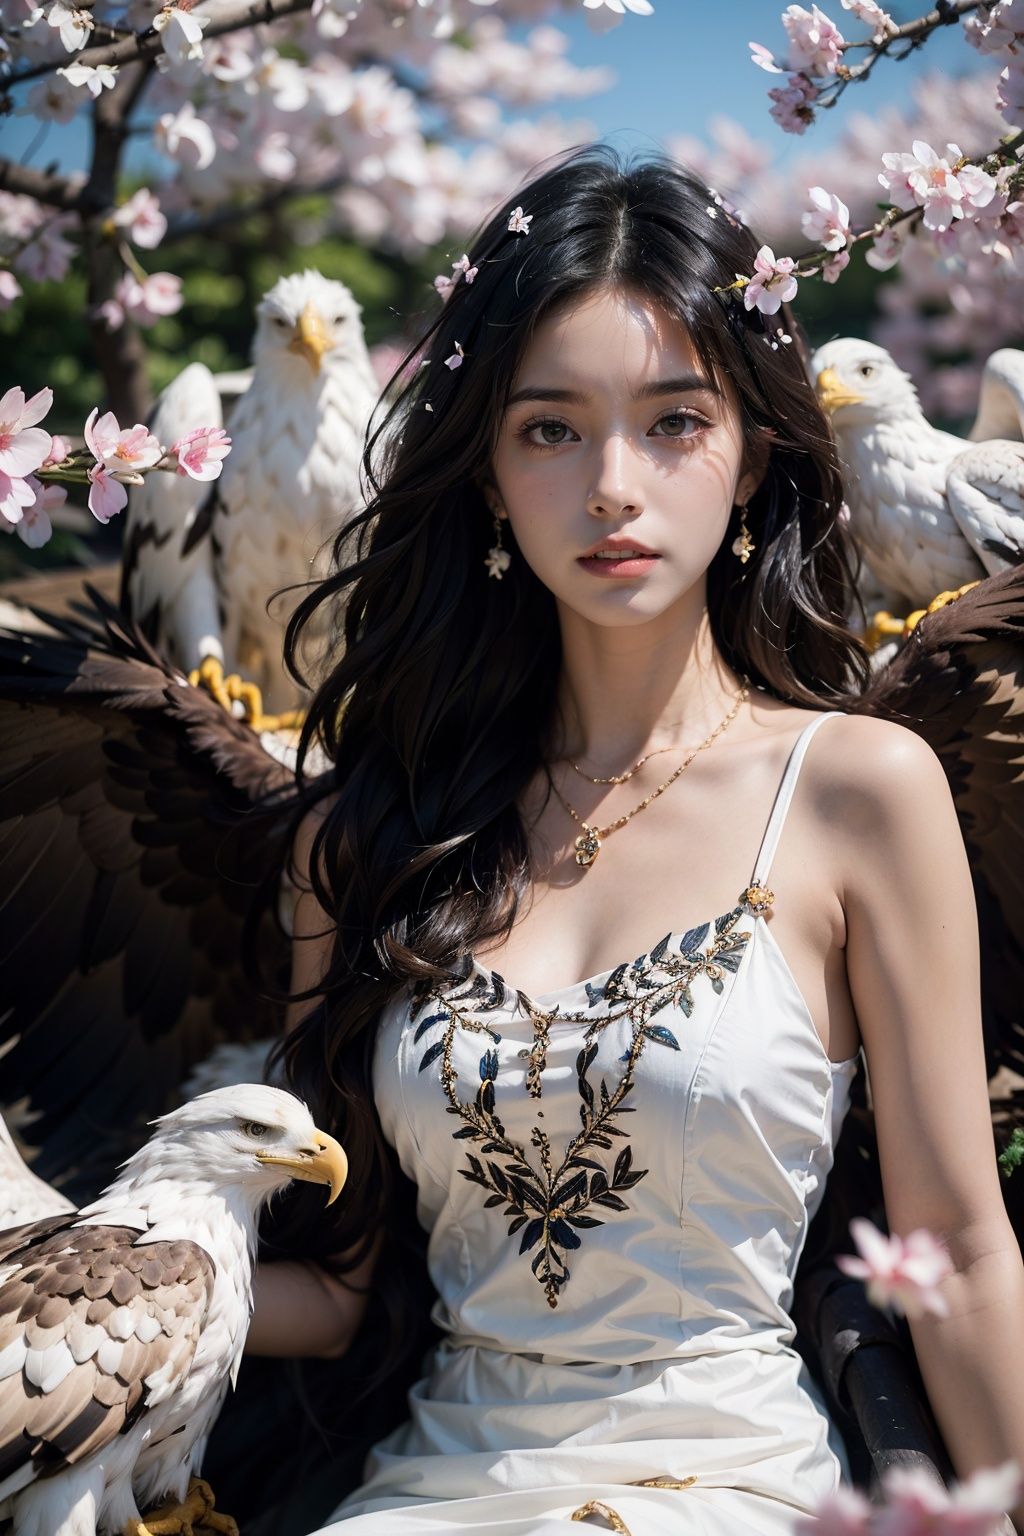 1 girl (surrounded by eagles), necklace, black hair, dress, sitting, black long hair, flowers, branches, solo, long hair, embroidered dress, brown hair, bare shoulders, various eagles, foreground blocking, depth of field, watching the audience, dynamic posture, realistic, cherry blossoms, feathers